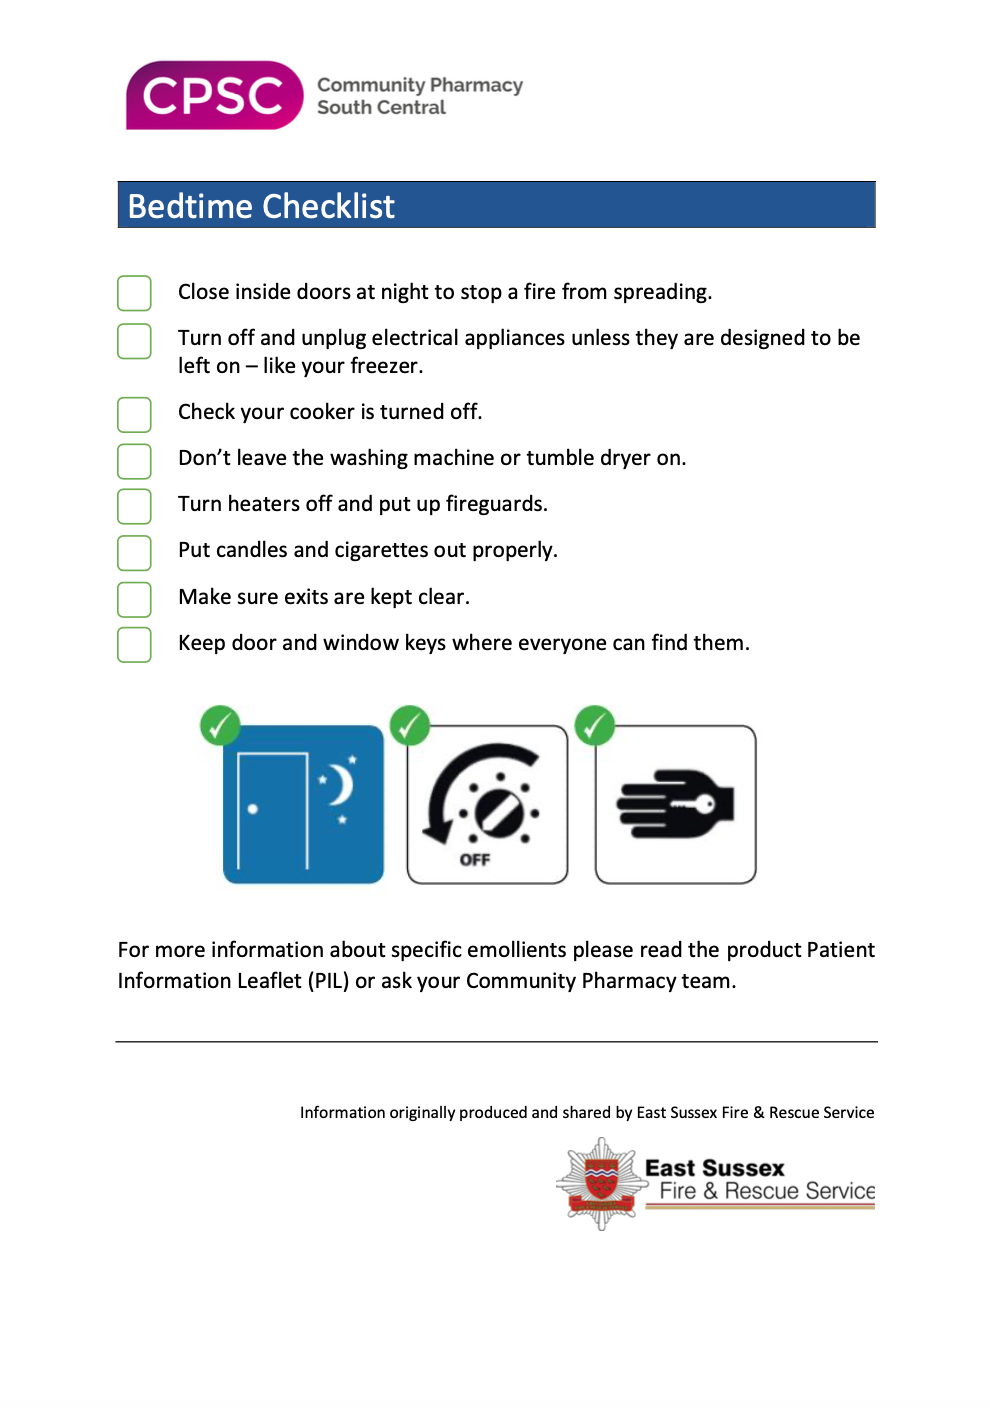 Fire Safety Advice leaflet for emollients p2.png